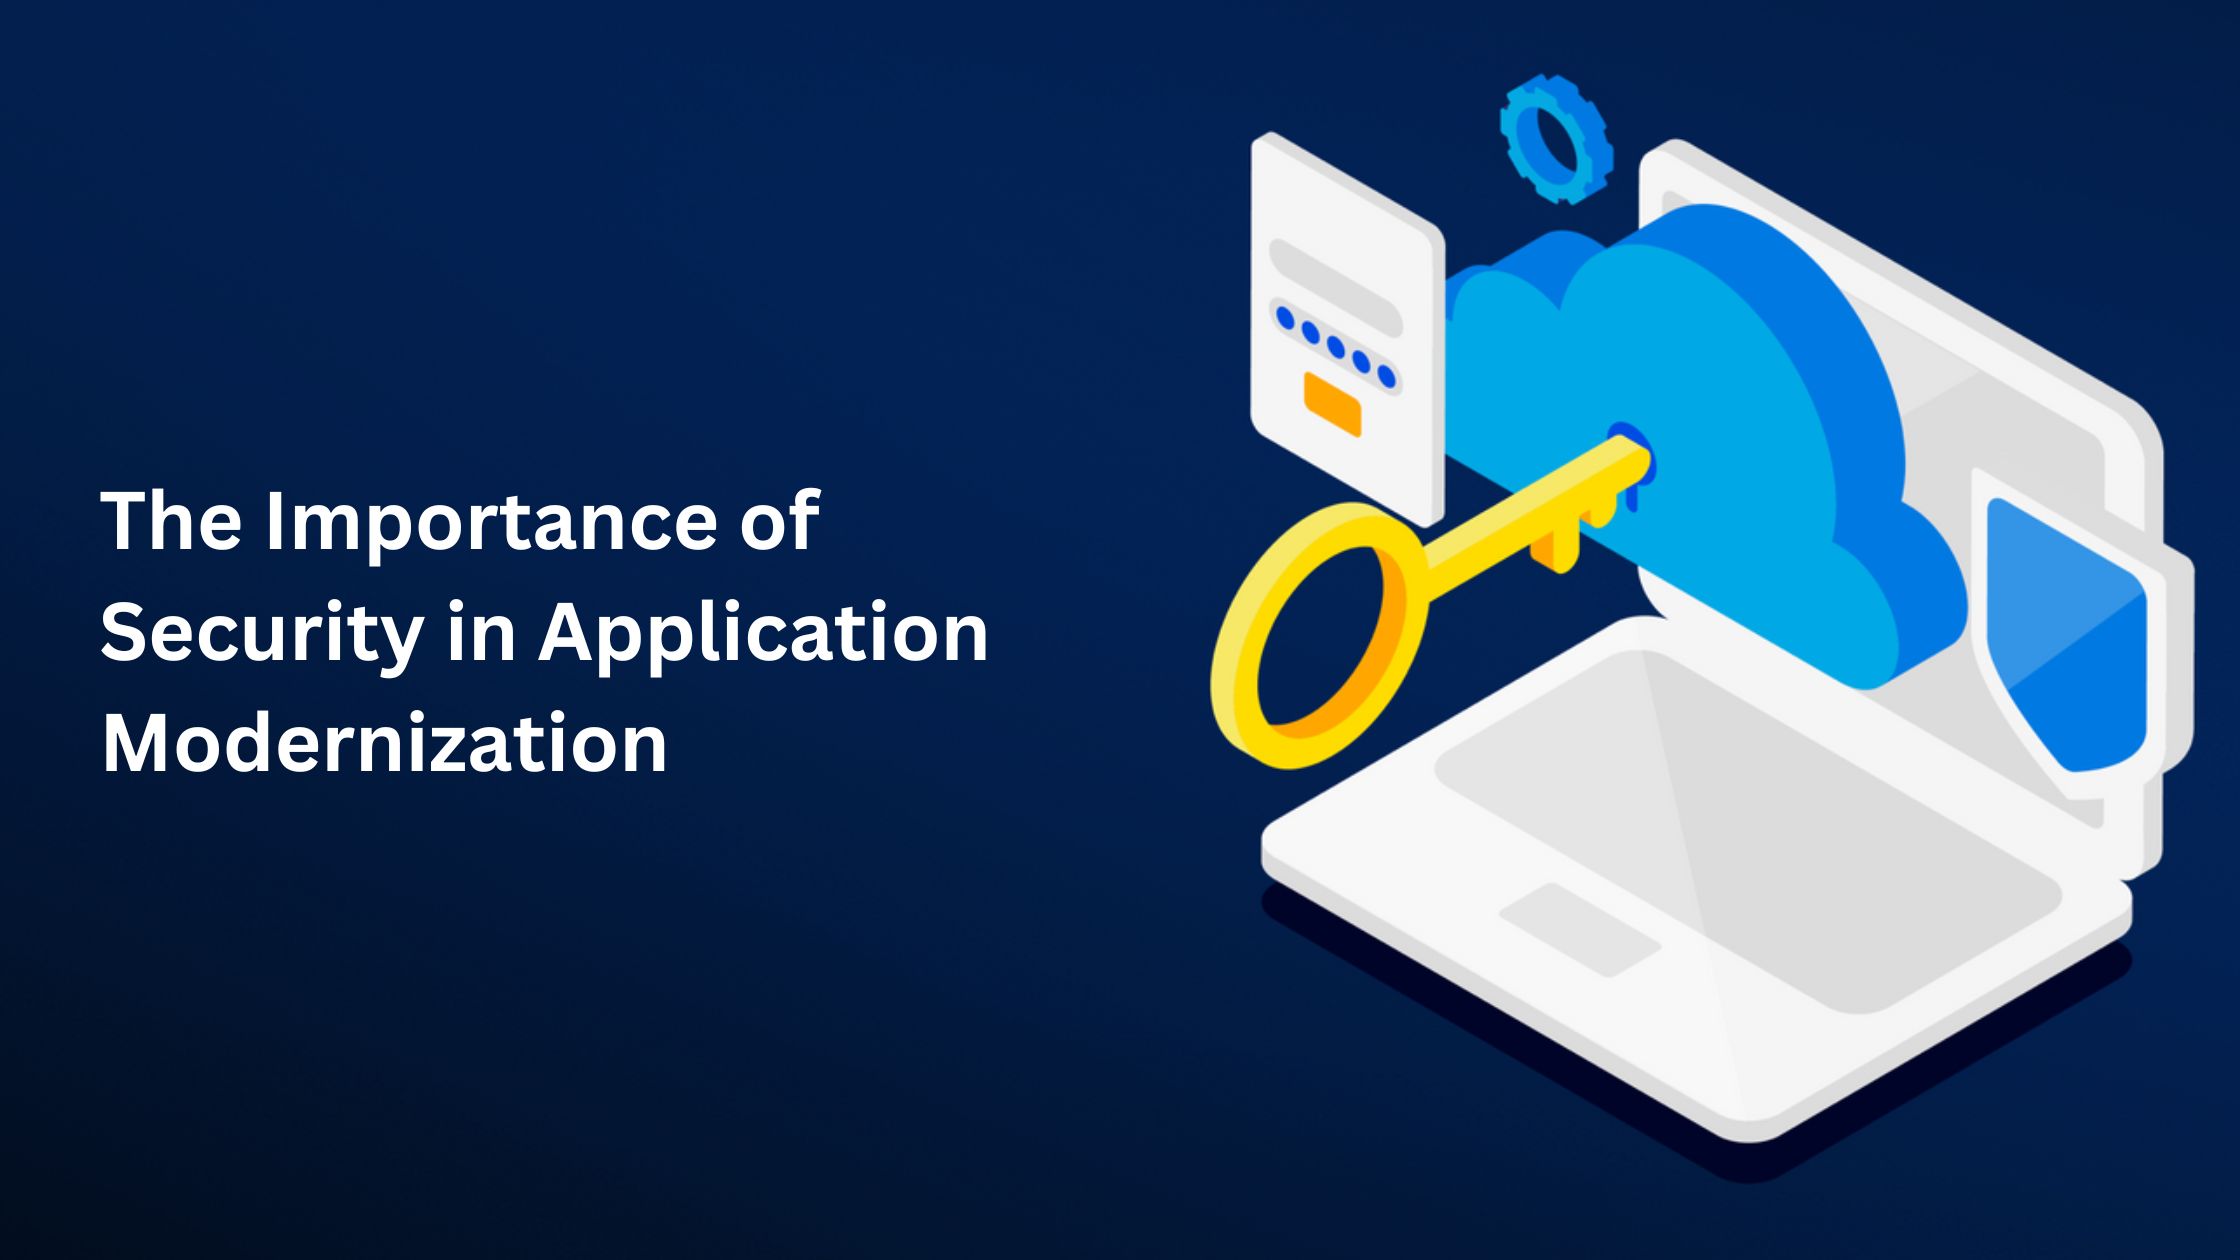 The Importance of Security in Application Modernization